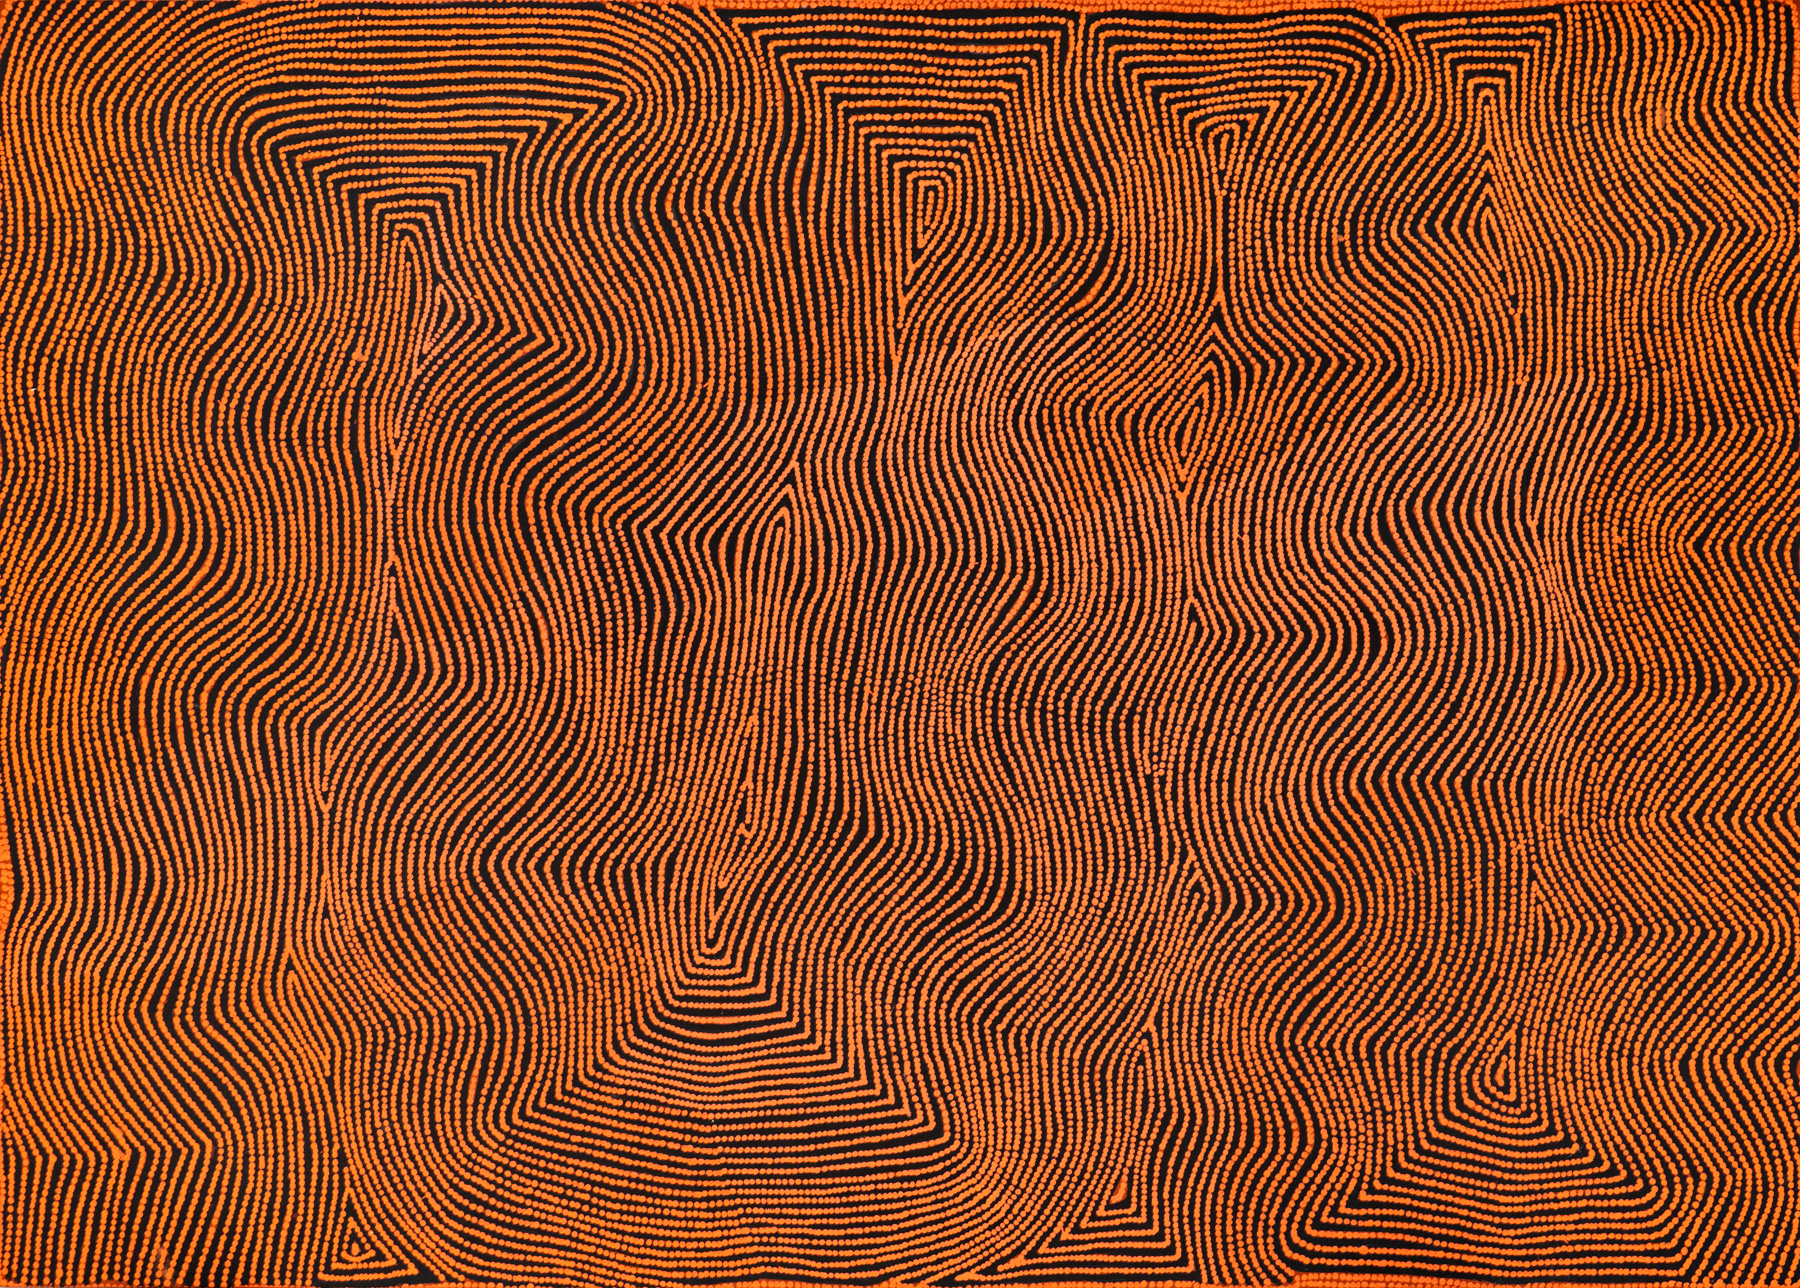 An acrylic painting on canvas, in which small burnt-ochre-coloured dots form abstract lines and patterns against a black background.